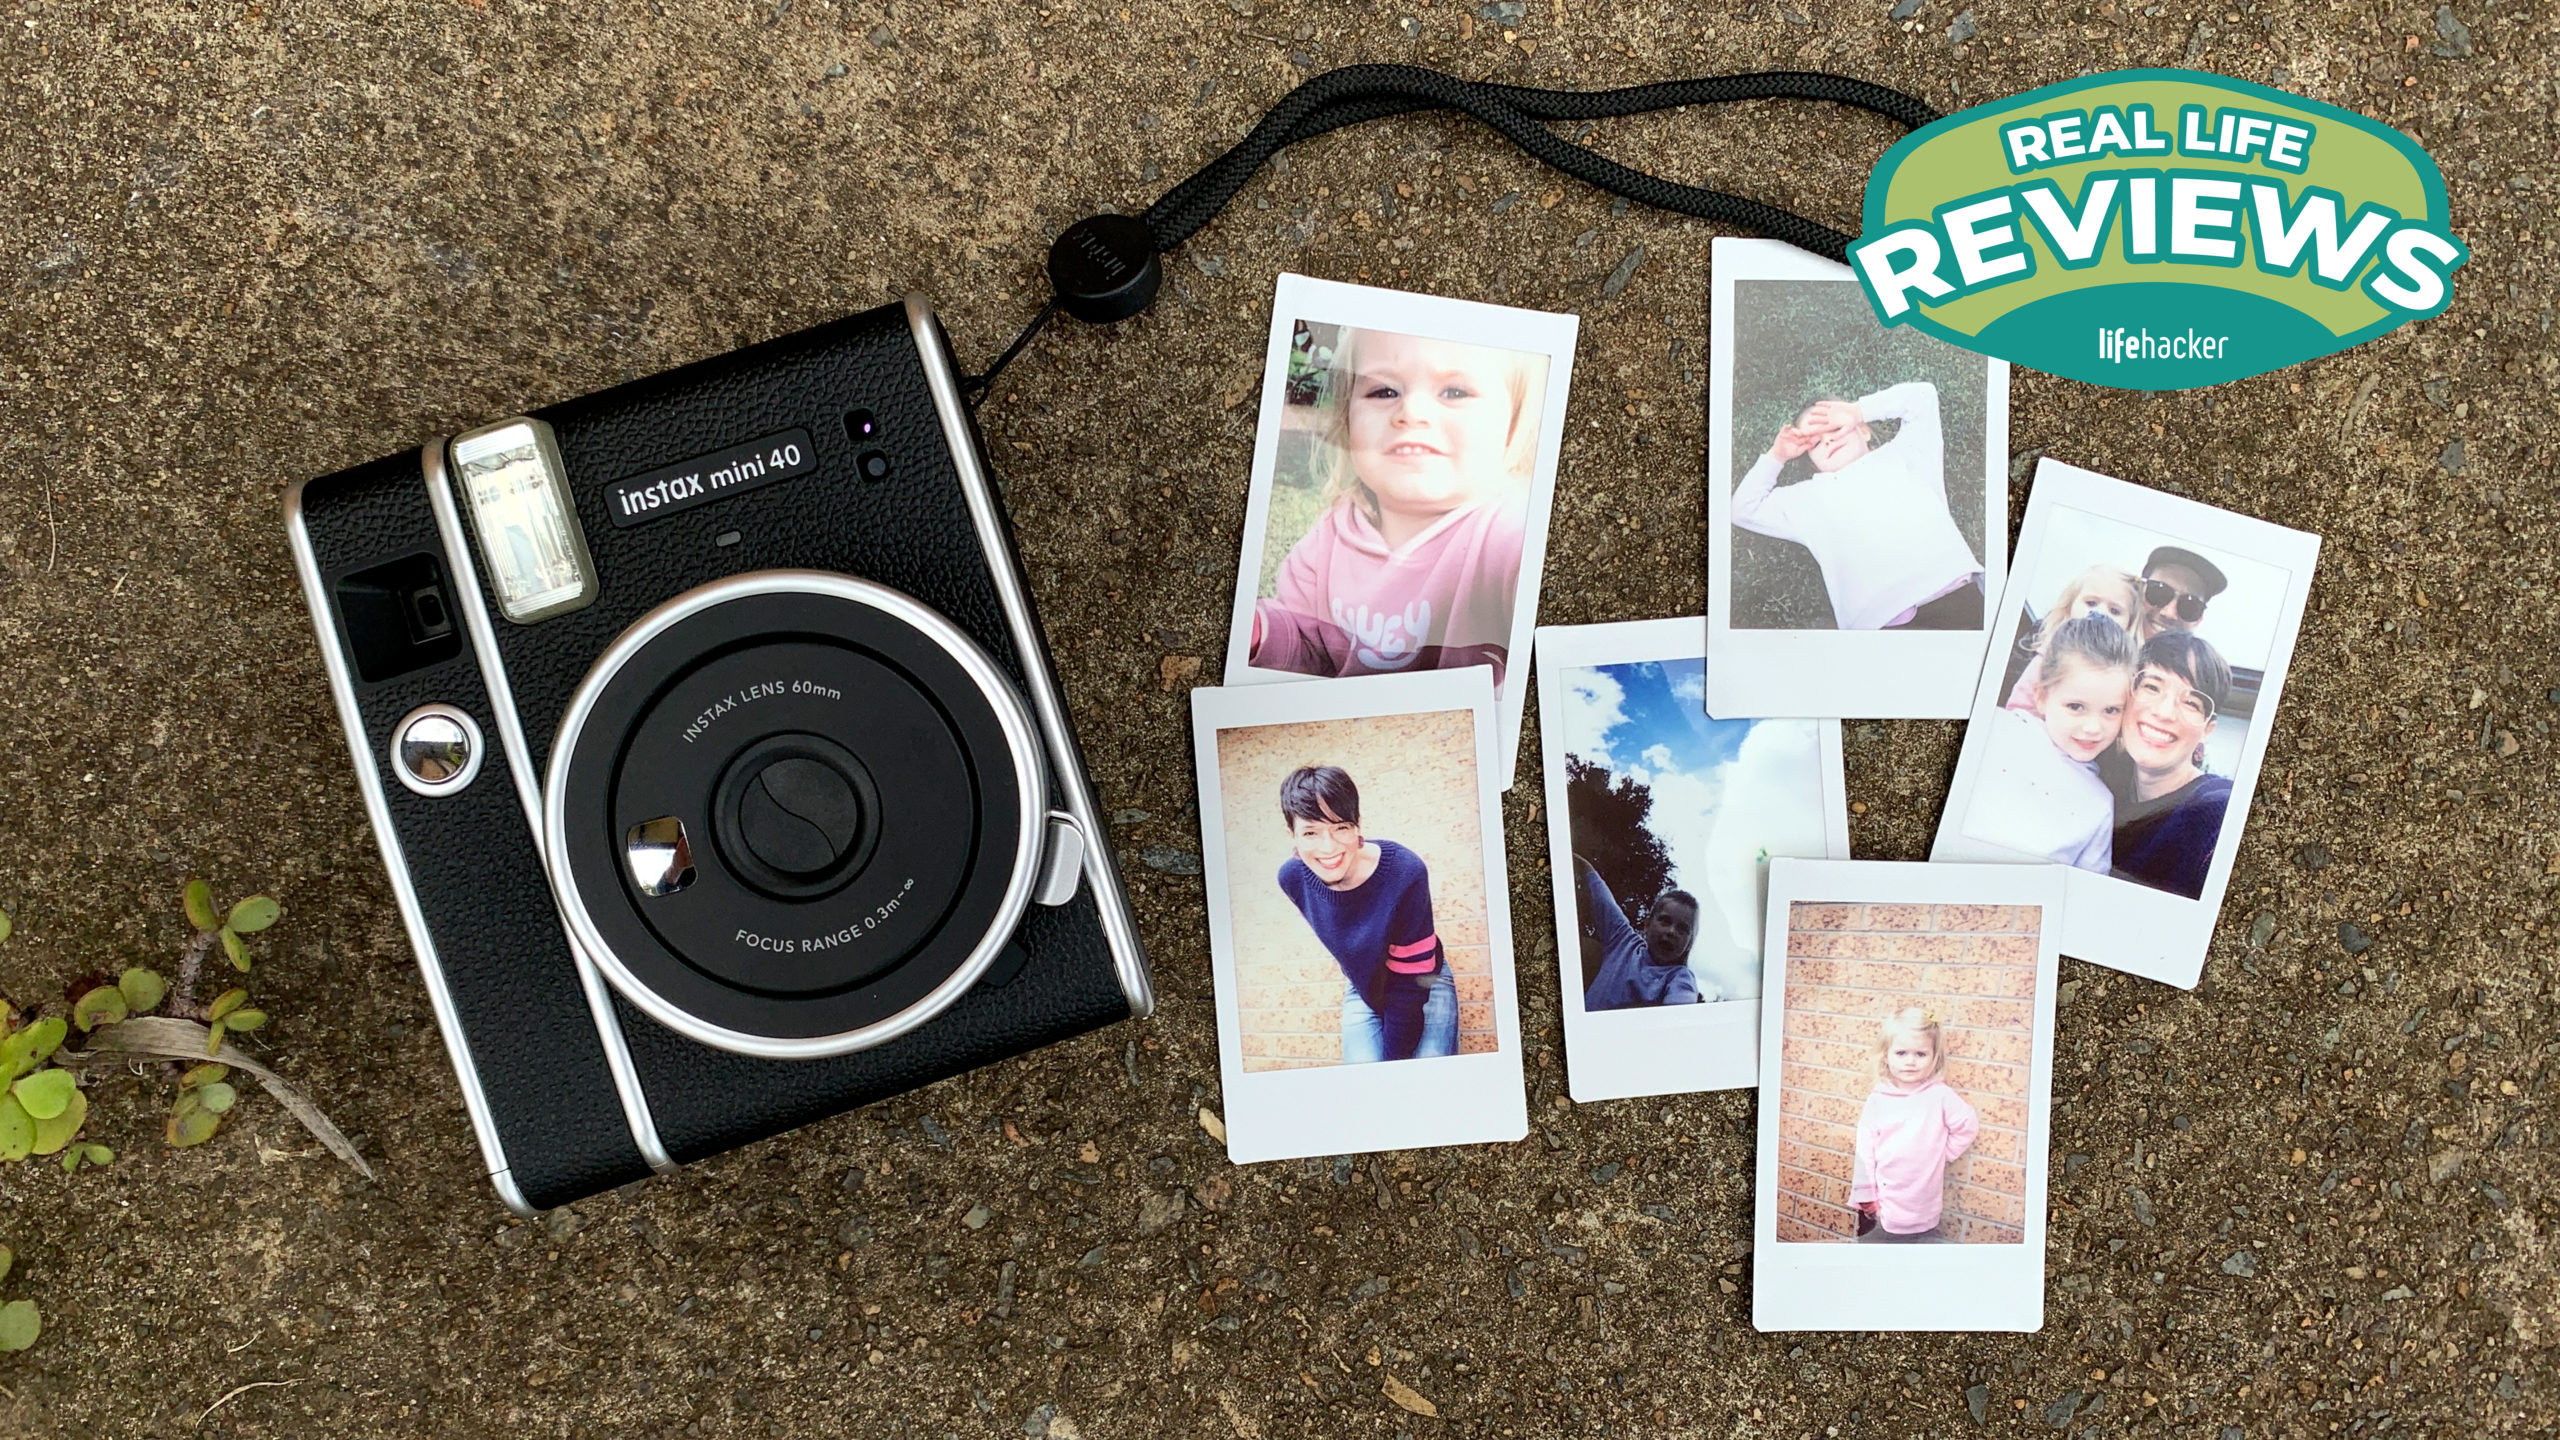 Instax mini 40 instant camera + official case designed exclusively